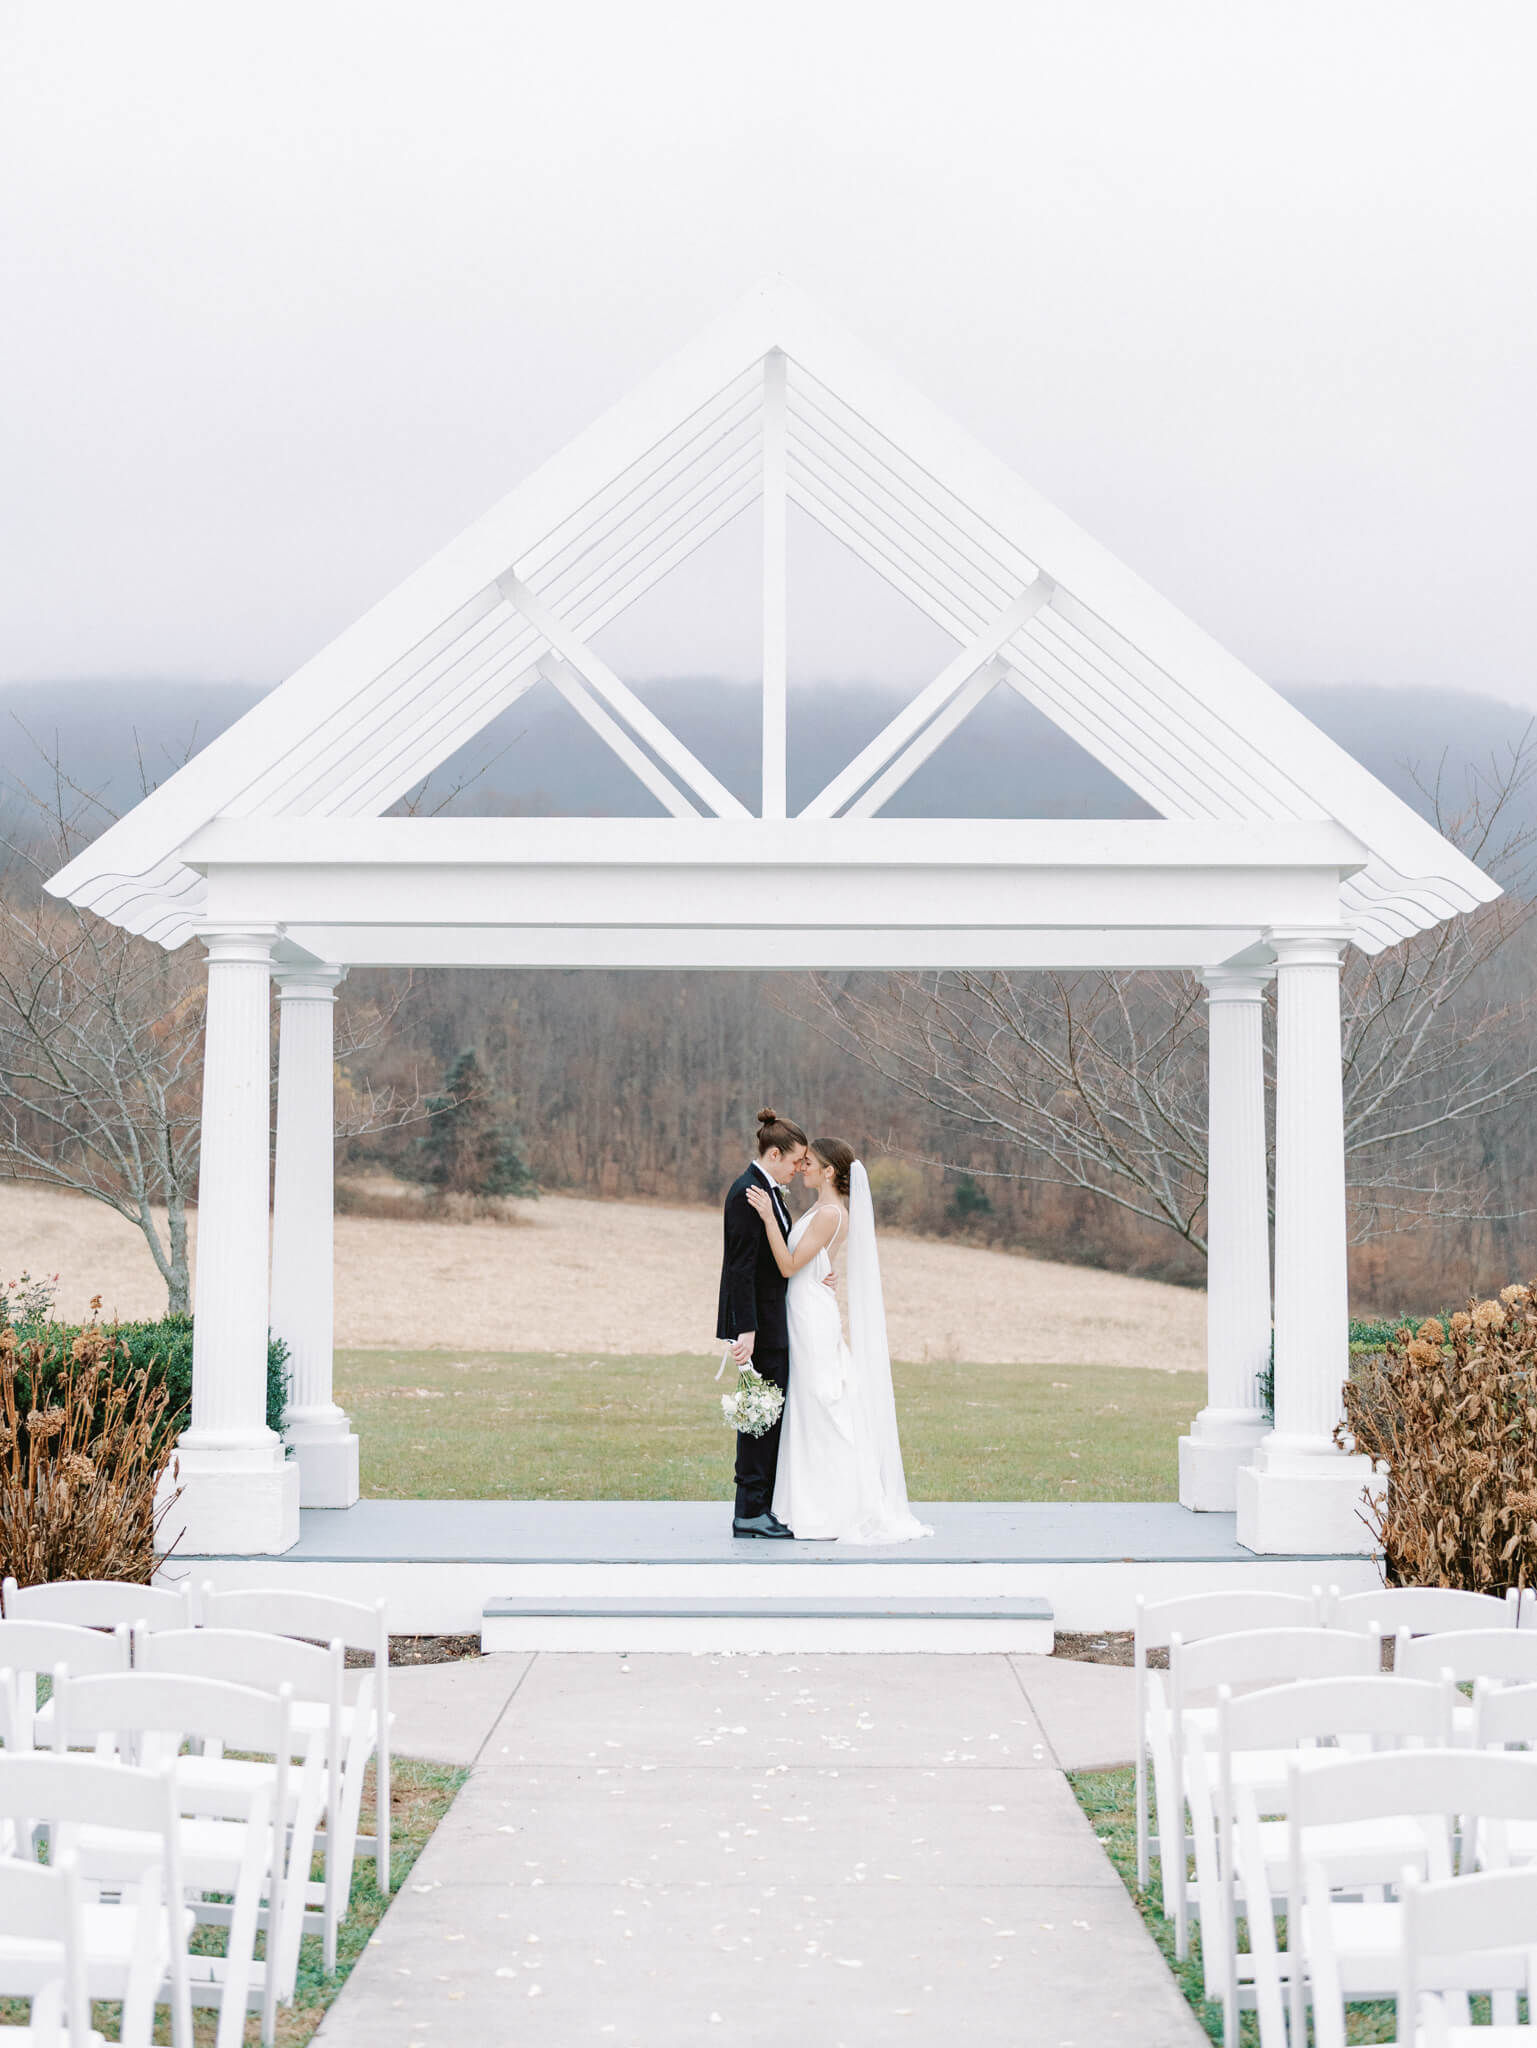 A bride and groom standing under their white arbor with their empty white ceremony chairs and fog in the background.